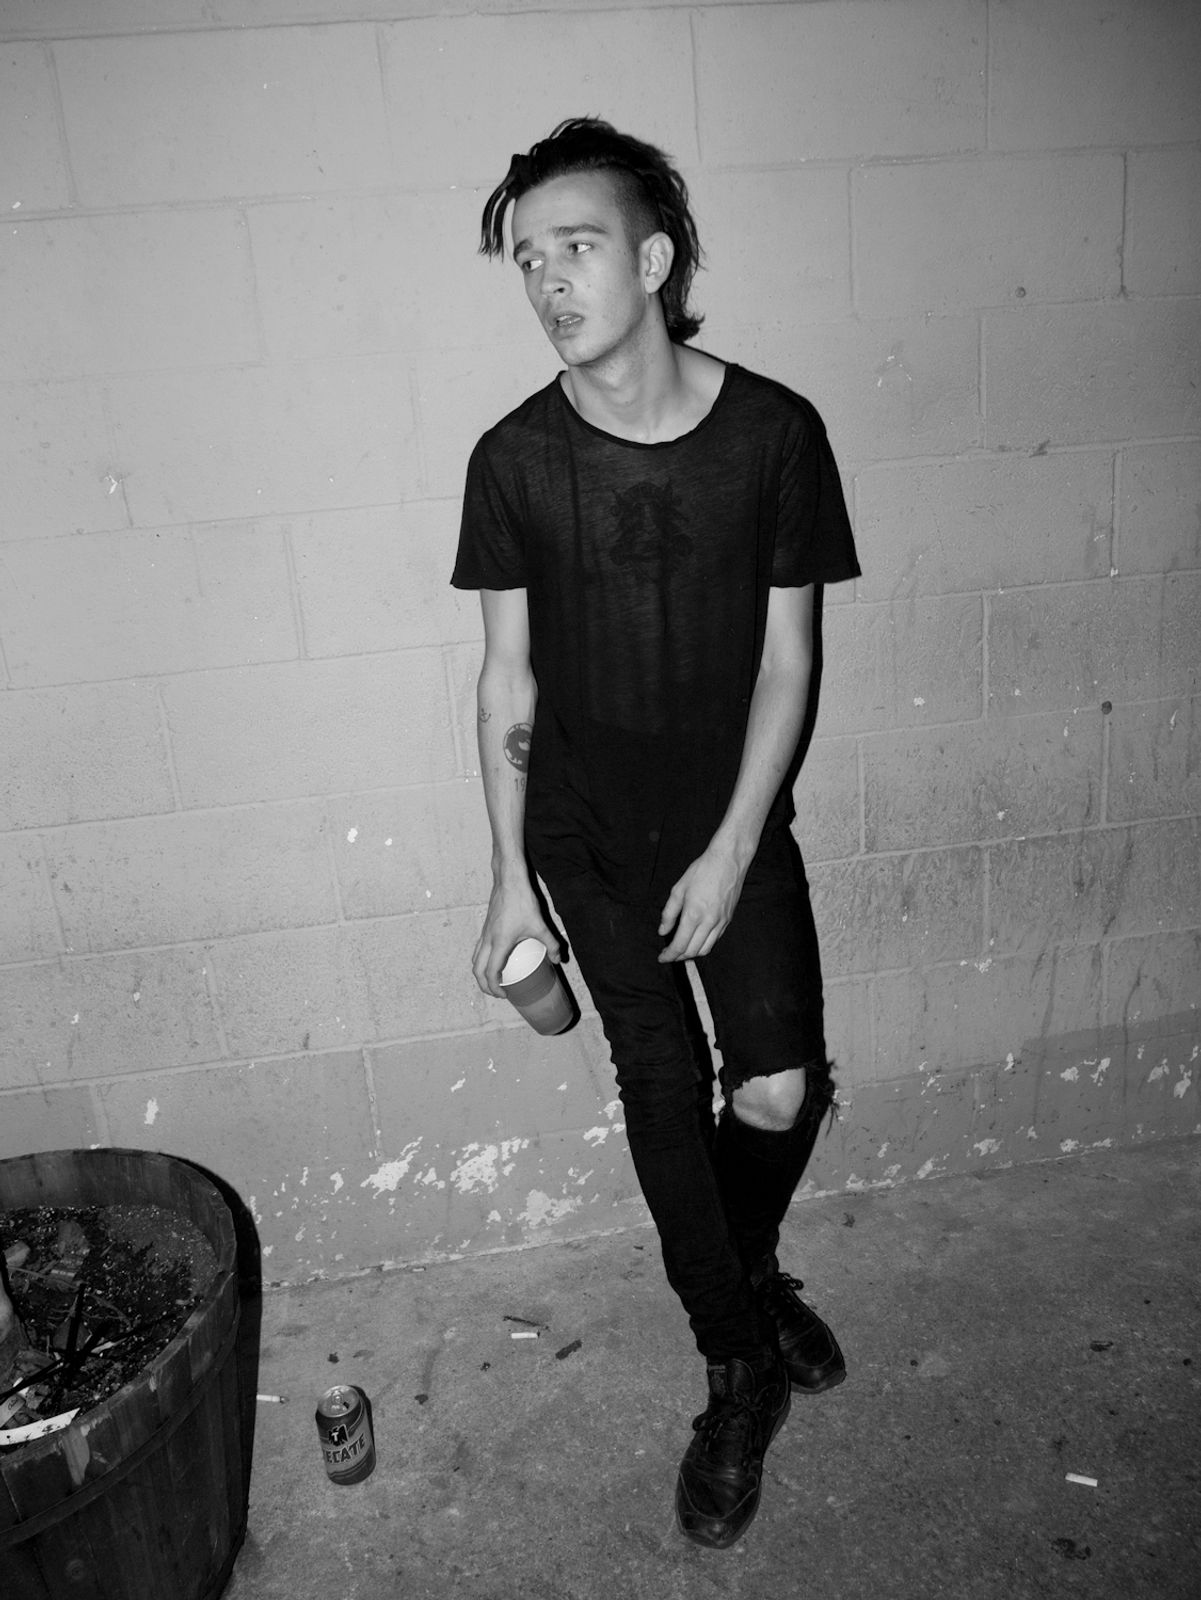 Matt Healy Of The 1975 Backstage Exclusive!